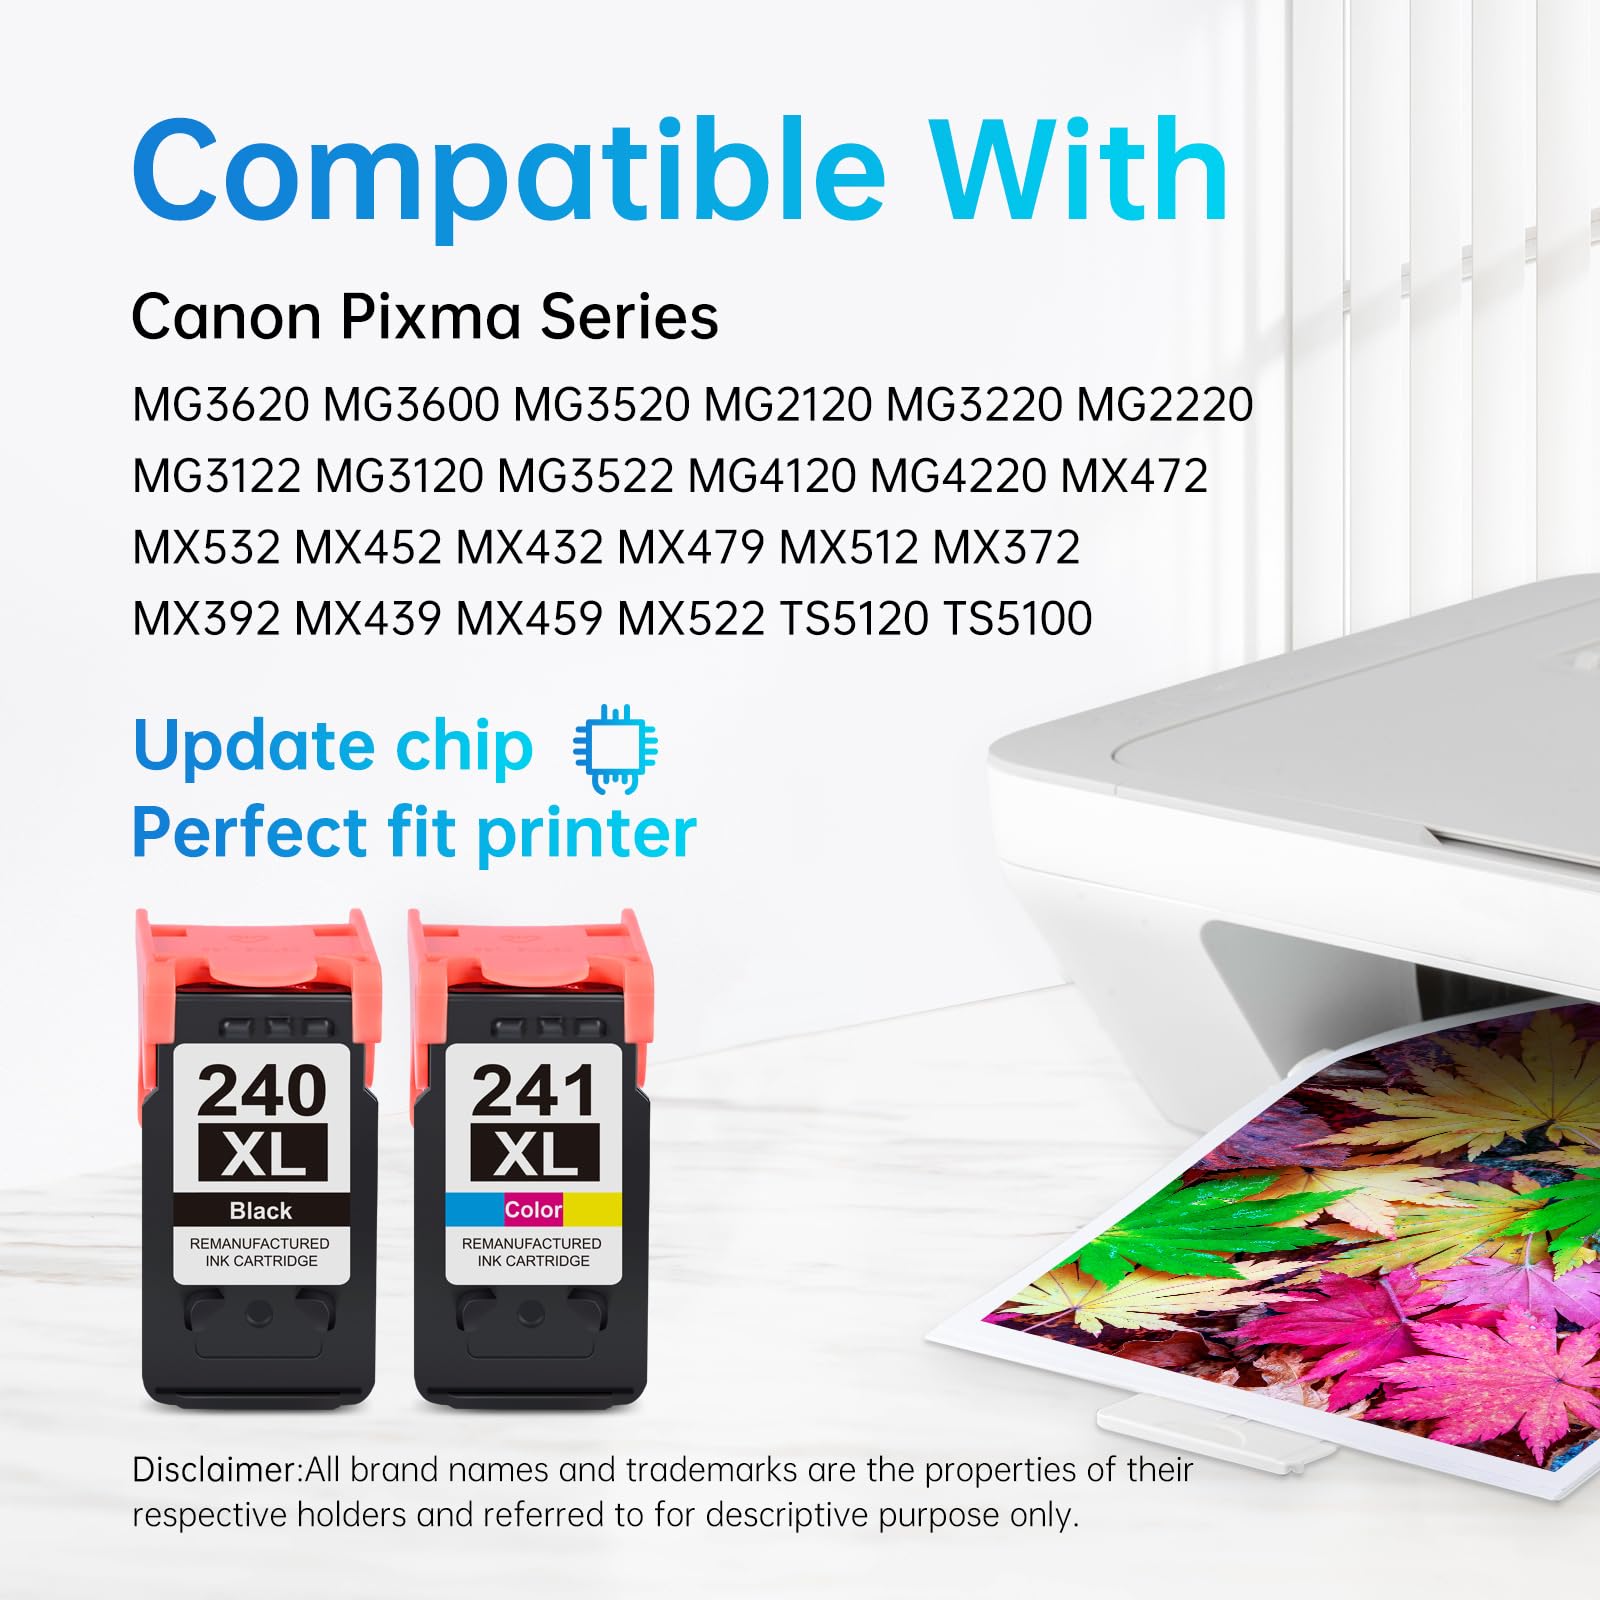 LEMERO 240XL and 241XL ink cartridges compatible with Canon Pixma Series printers.